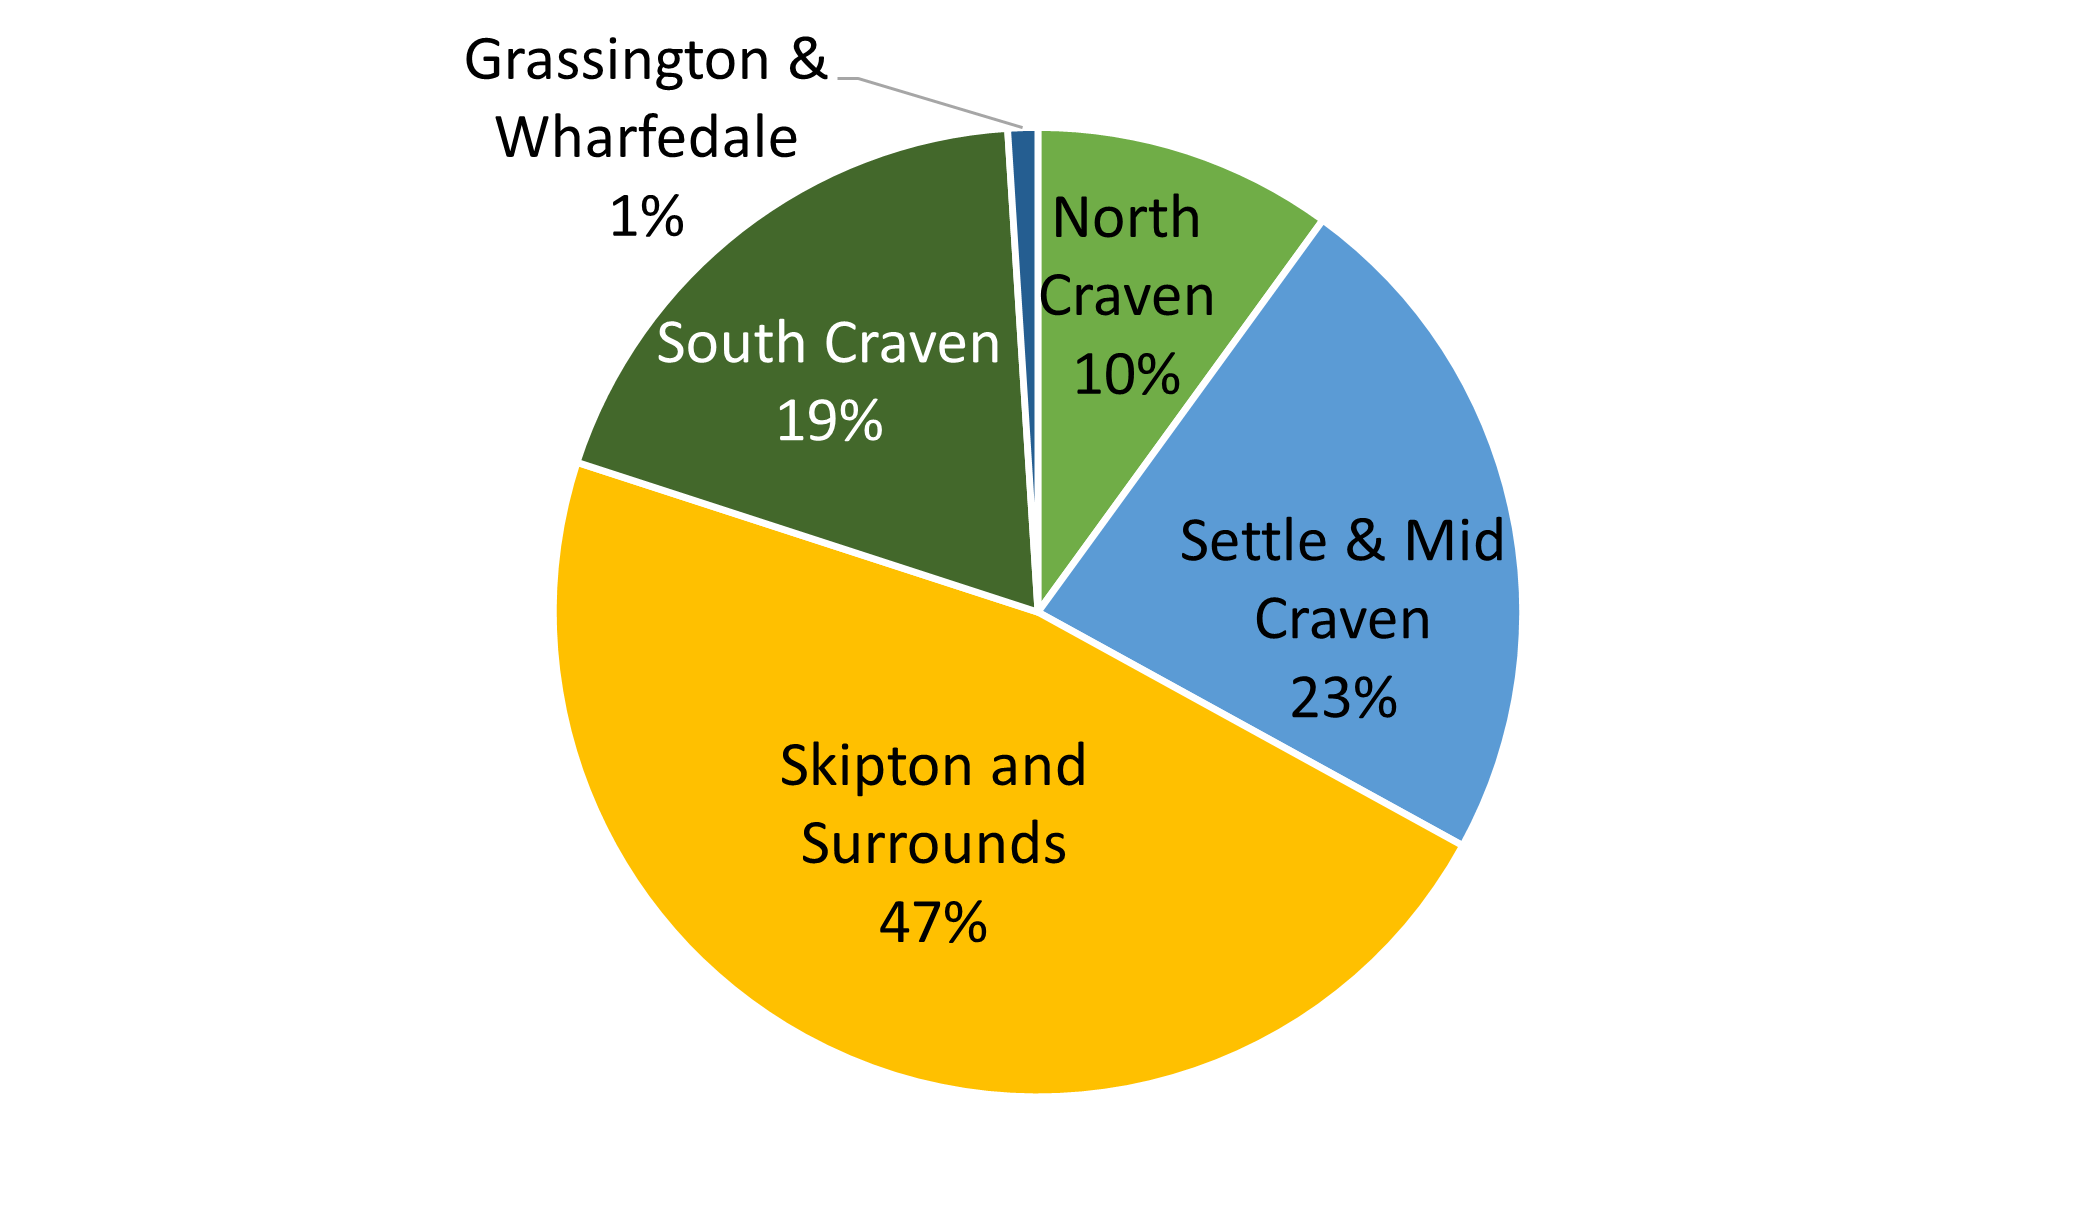 ""A pie chart showing where people lived in Craven. 47% were from Skipton and the surrounding area. 